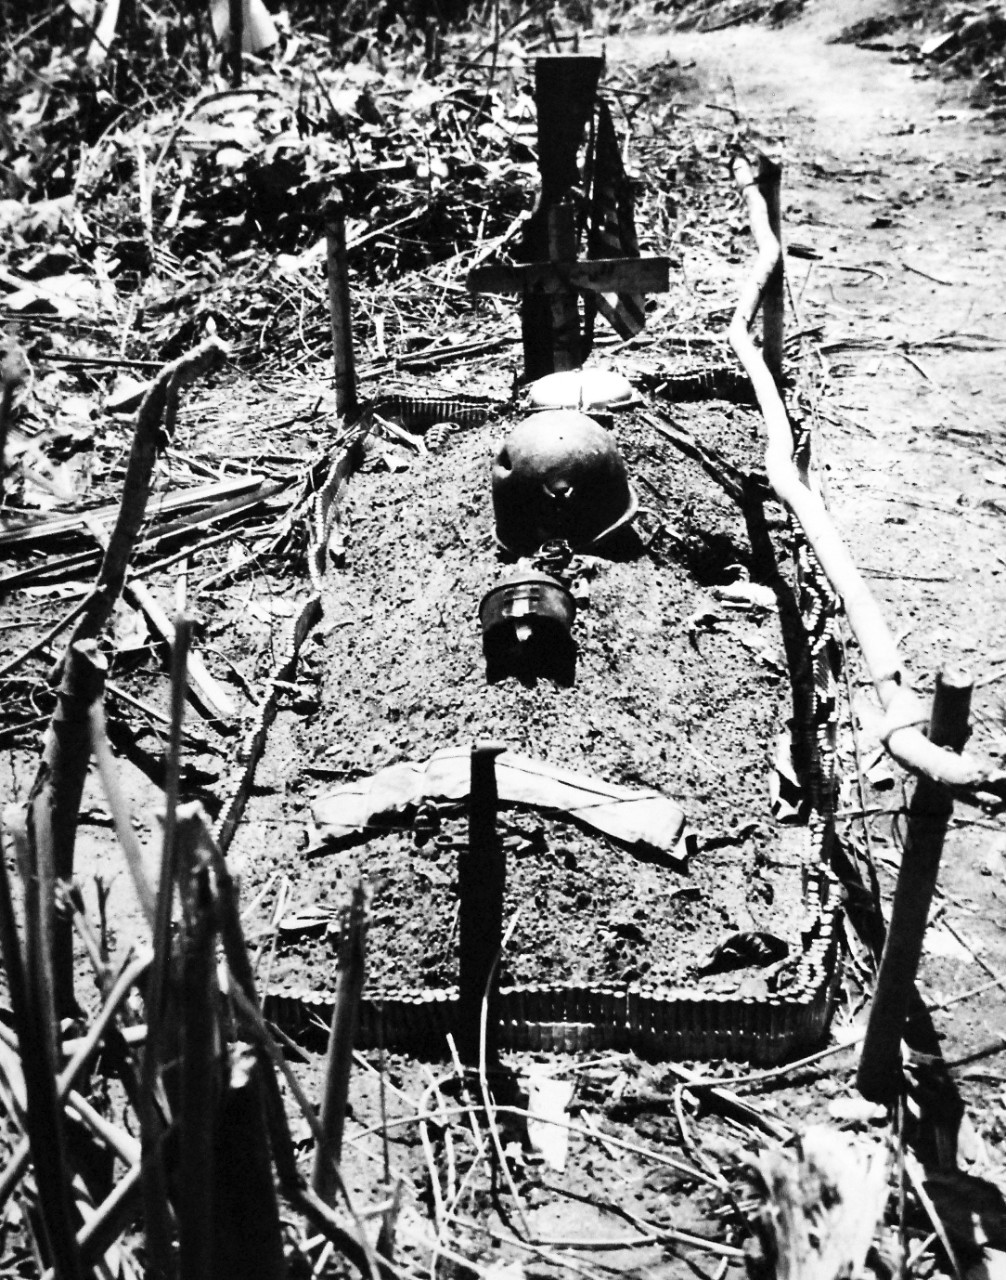 80-G-207839:  Bougainville Campaign, November 1943-August 1945.   Machine-gun bullets, outline grave of Marine paratrooper buried on the spot where he was killed on Hallzapoppin Ridge, Bougainville.  Near the crude cross marking, the grave is a flag and rifle.  A bullet-ridden helmet and mess gear are also on the grave.   Photograph released January 14, 1944.    U.S. Navy photograph, now in the collections of the National Archives.  (2016/06/21).